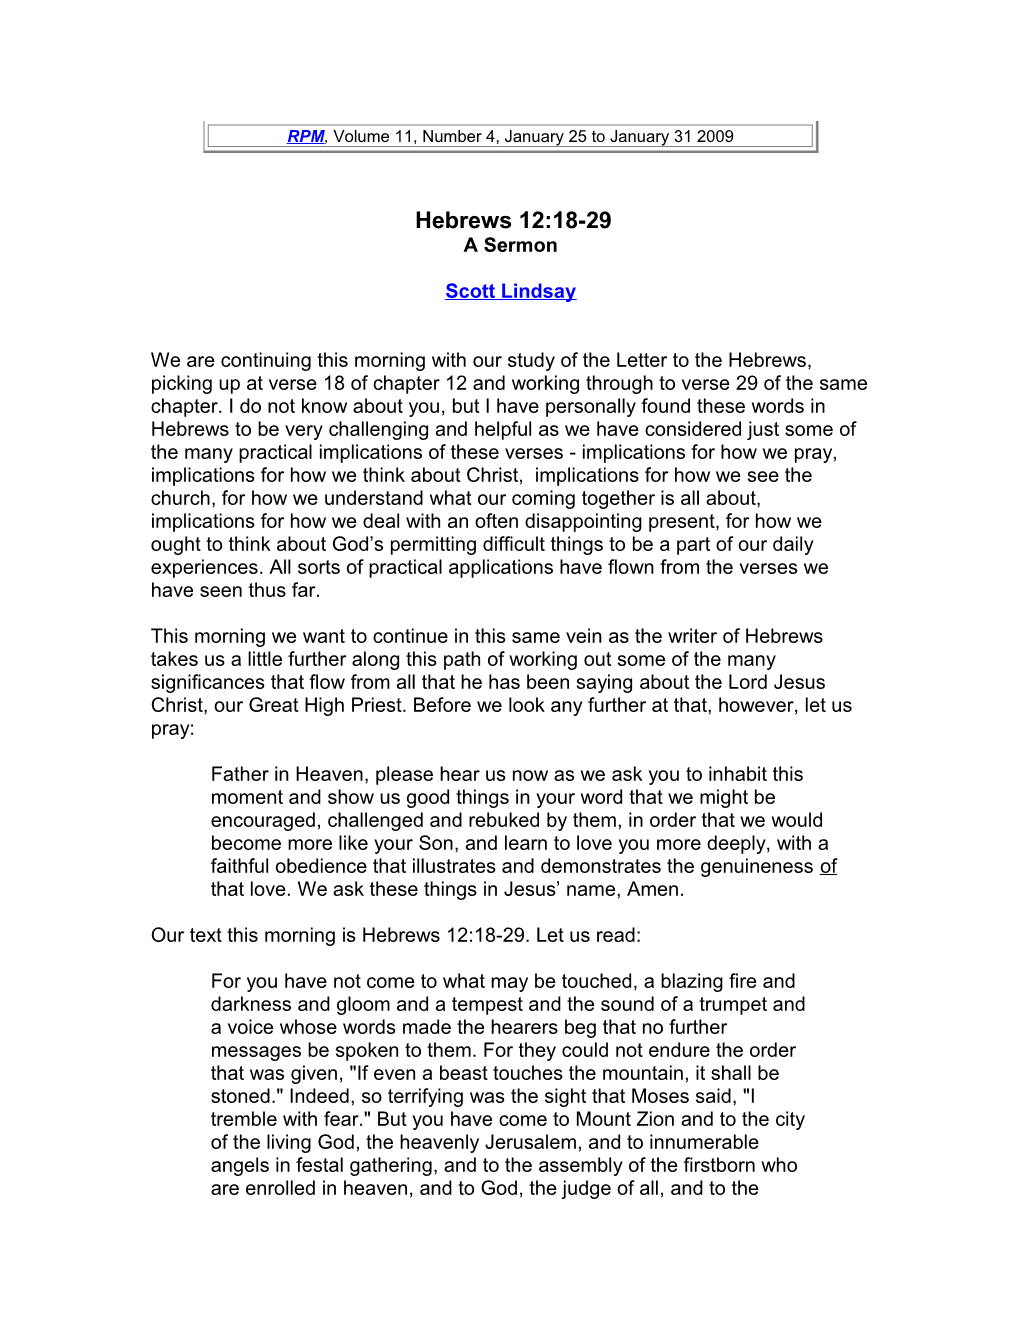 Our Text This Morning Is Hebrews 12:18-29. Let Us Read